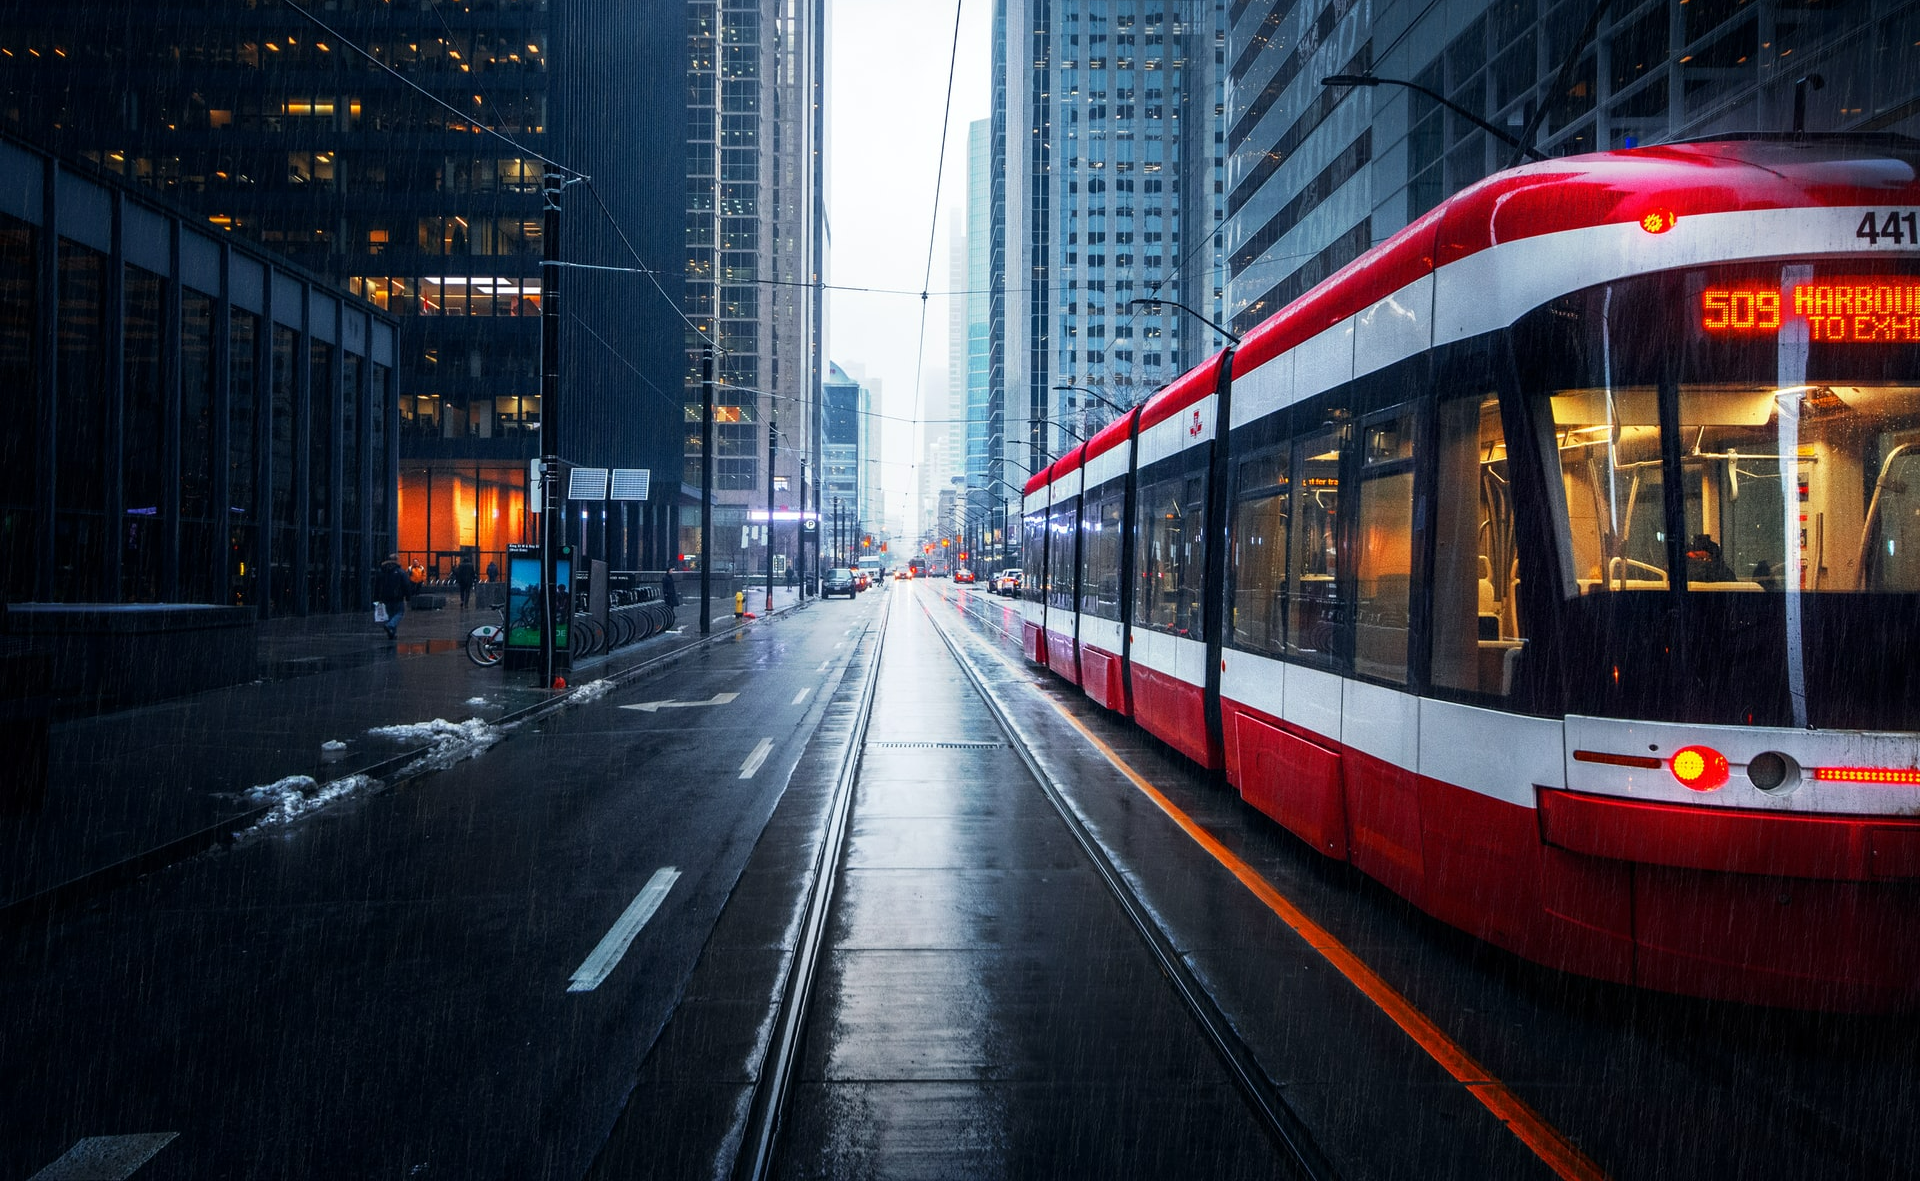 While riding on one of Toronto's railcars, we discussed the reasons why loyalty marketing technology continues to evolve.